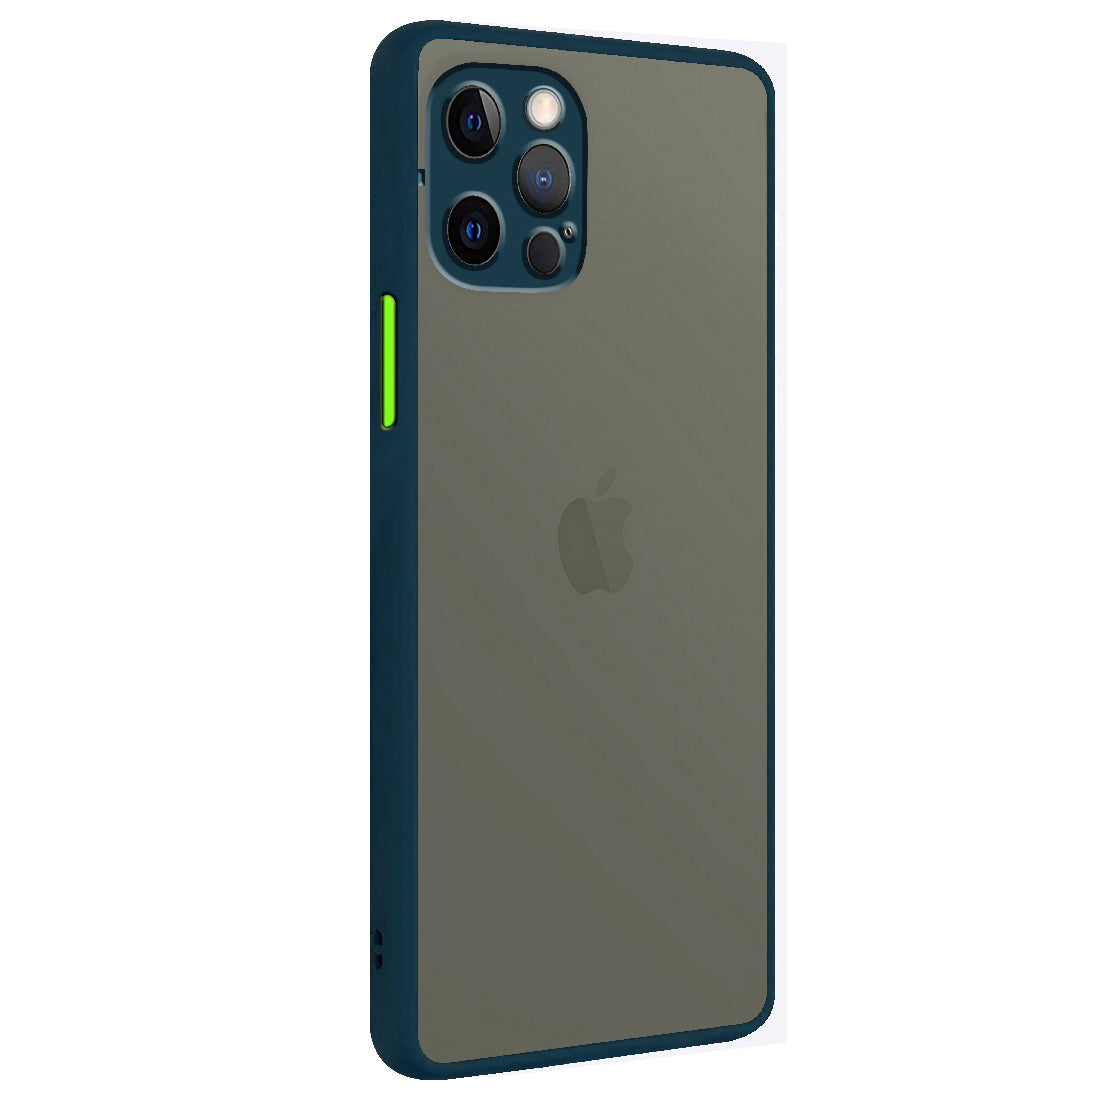 Smoke Back Case Cover for Apple iPhone 12 Pro